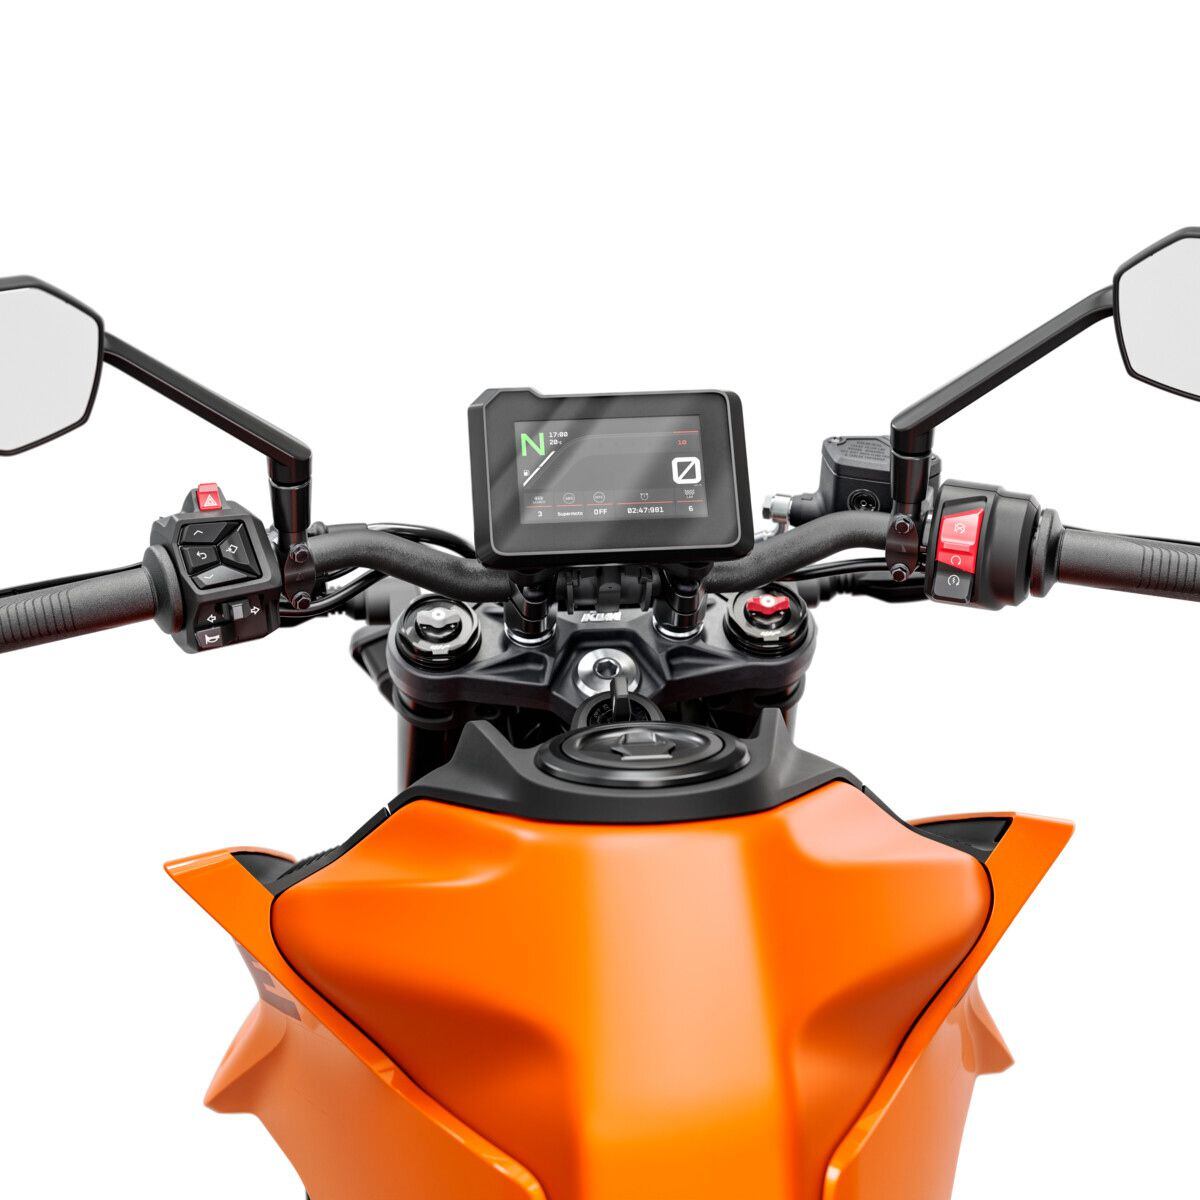 The 390 has an updated 5-inch TFT dash lifted from other models in the KTM lineup. The 250 makes do with an identical looking unit, except its display is LCD.